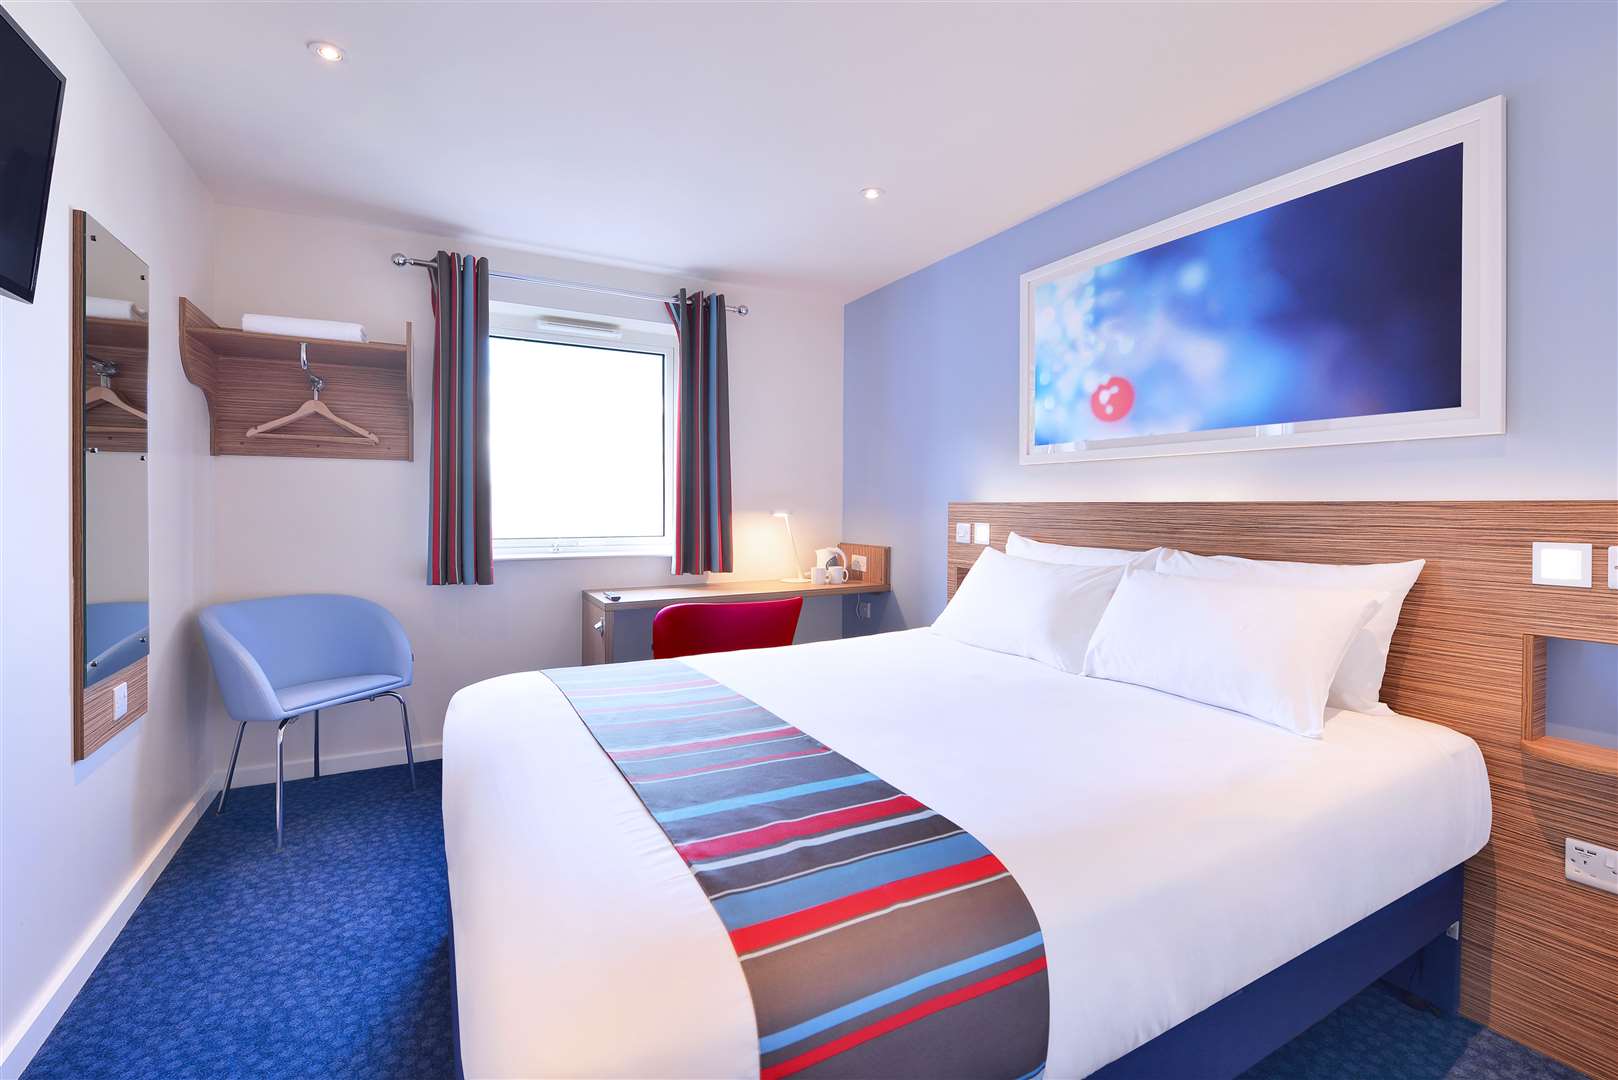 Travelodge says a number of vacancies are available immediately